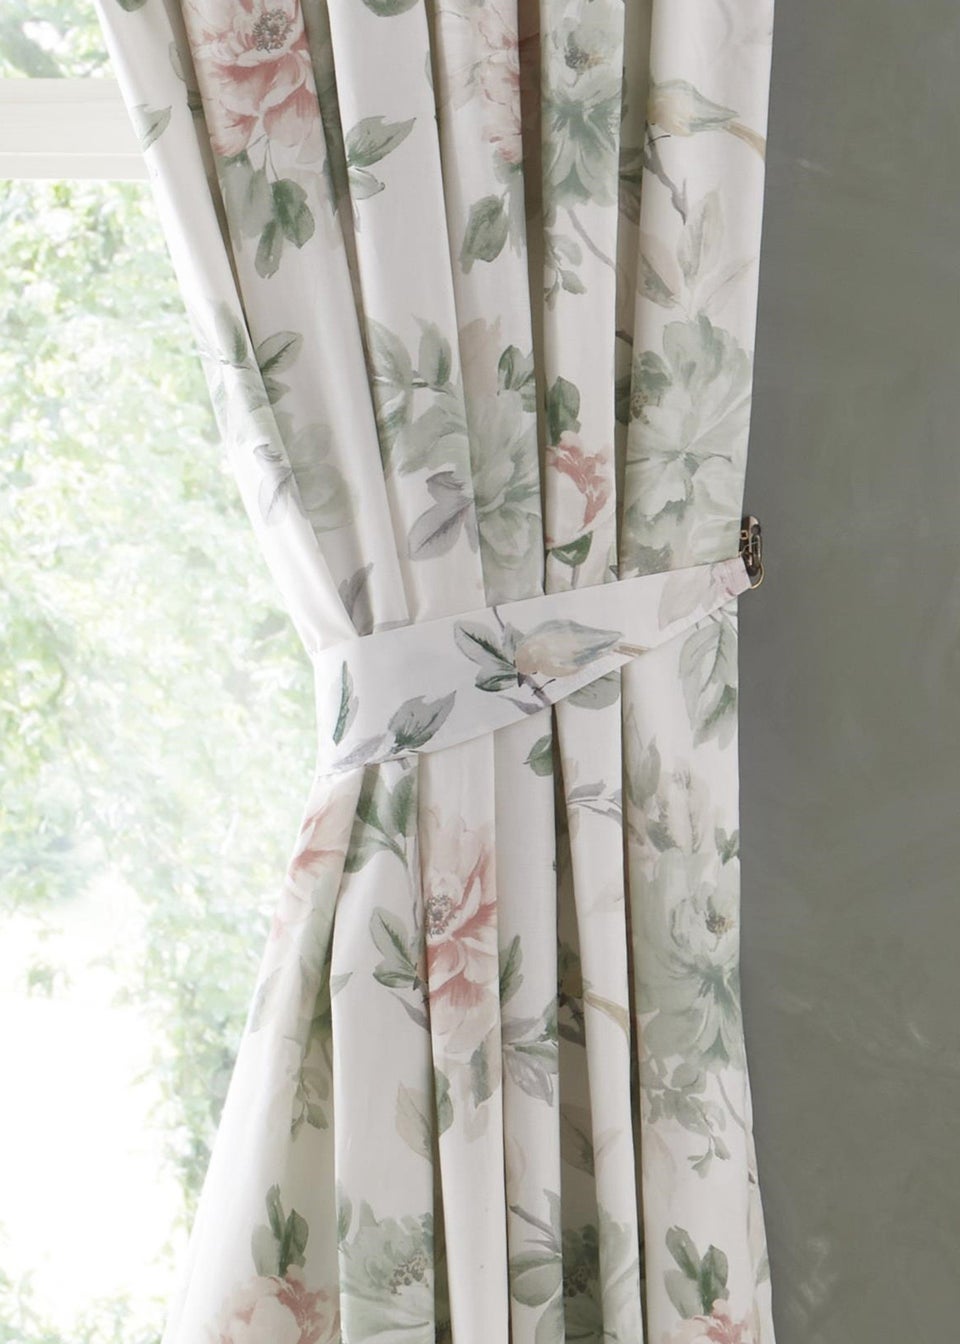 Appletree Heritage Campion Sateen Green Pencil Pleat Curtains With Tie-Backs